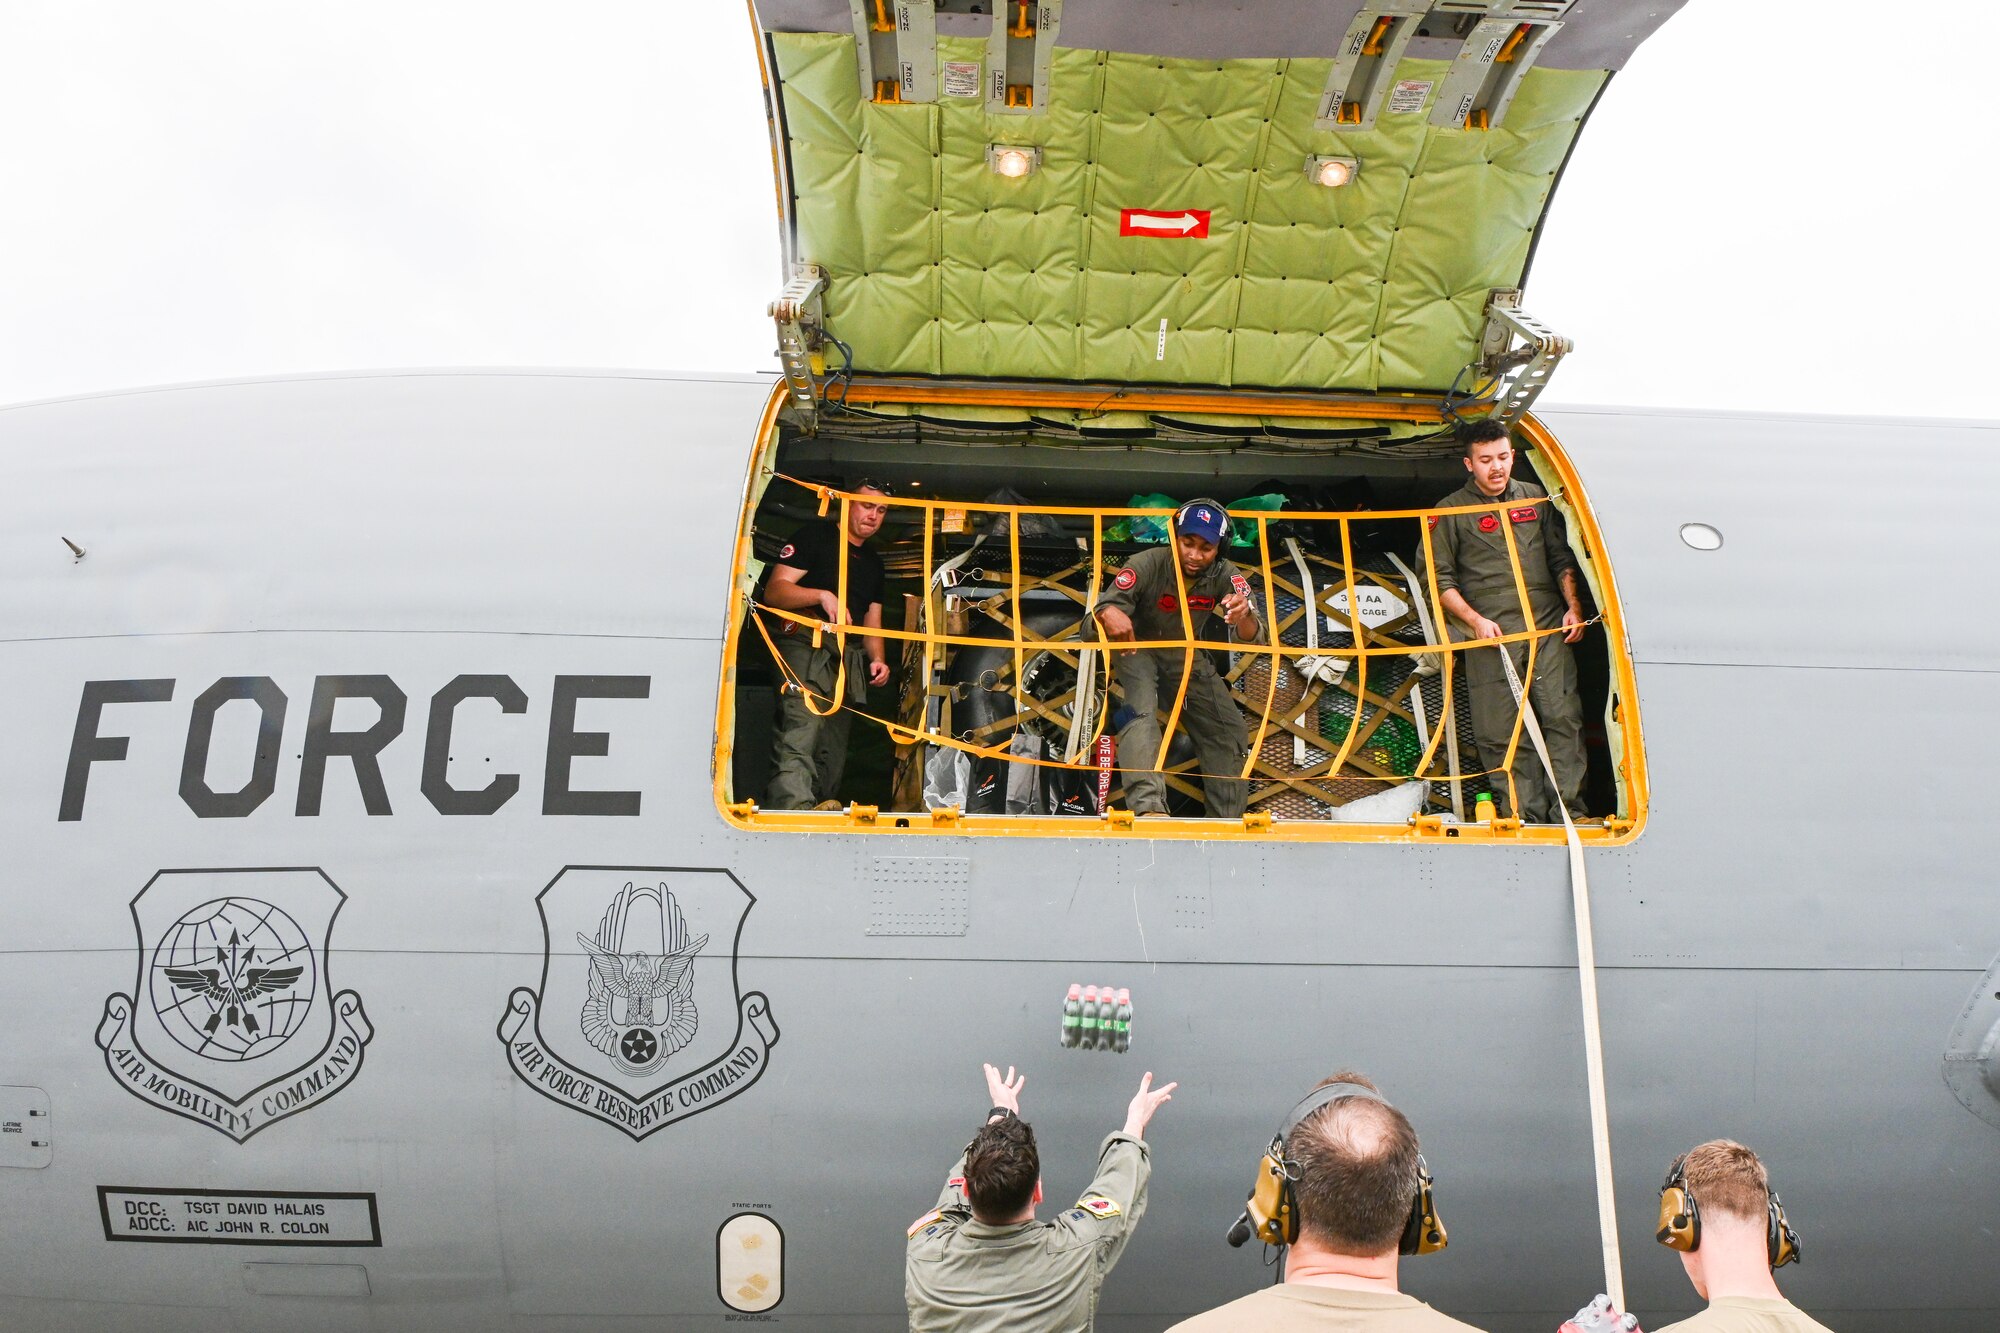 Aircrew from the 50th Air Refueling Squadron, MacDill Air Force Base, load Brazilian beverages onto a KC-135 Stratotanker in Rio de Janeiro, Brazil, Jan. 24, 2023. During the course of seven days, two KC-135 Stratotankers stopped in Brazil as they circumnavigated the Southern Hemisphere during an unprecedented endurance mission. (U.S. Air Force photo by 2nd Lt. Kristin Nielsen)